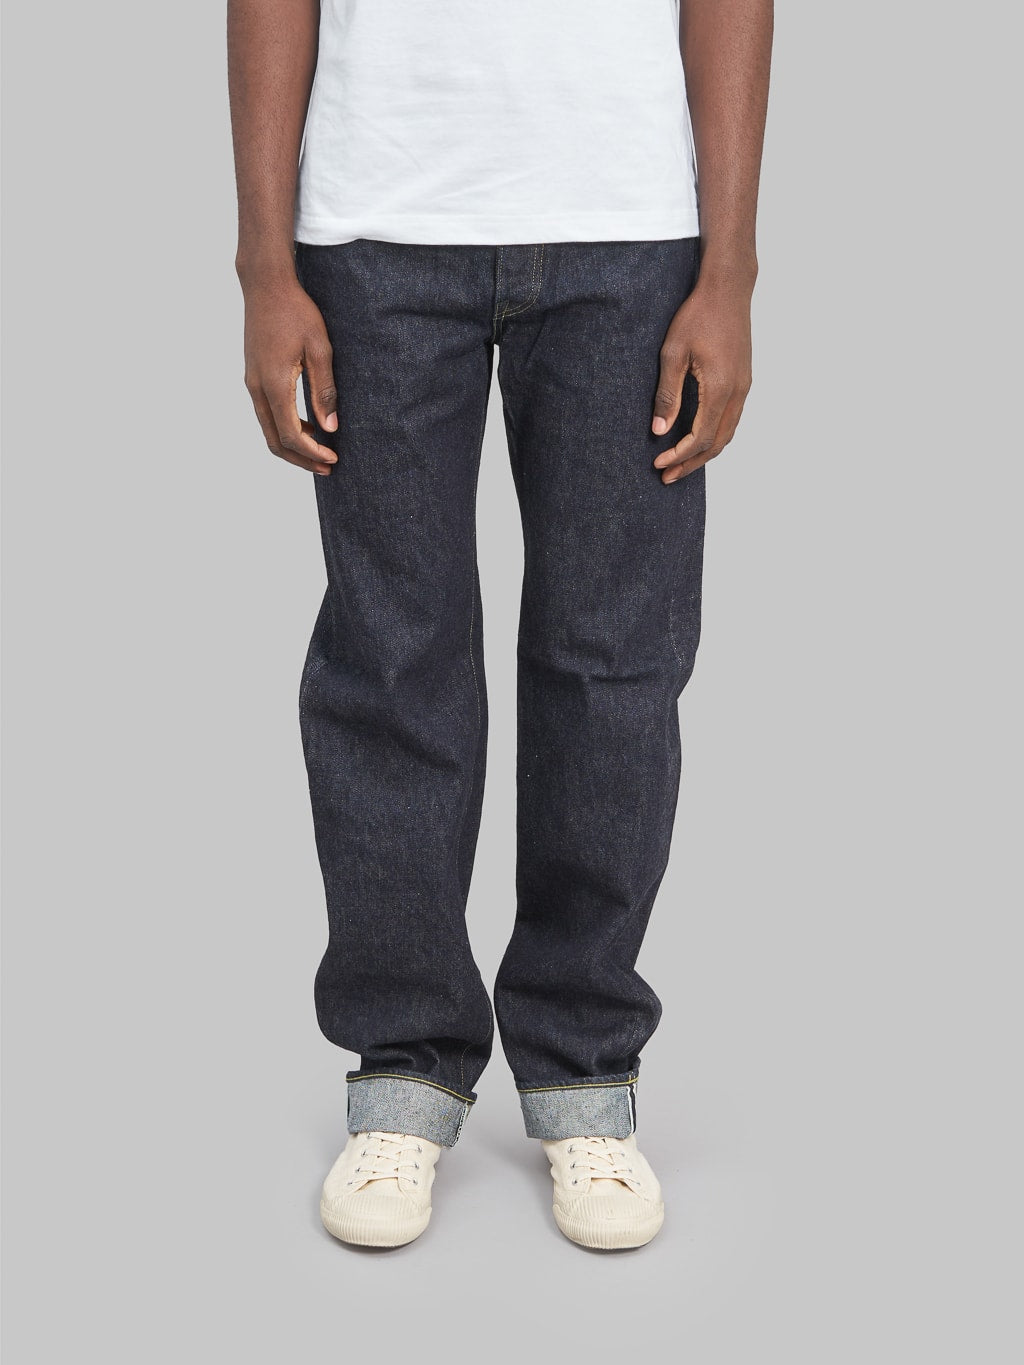 tcb s40s regular straight jeans front fit